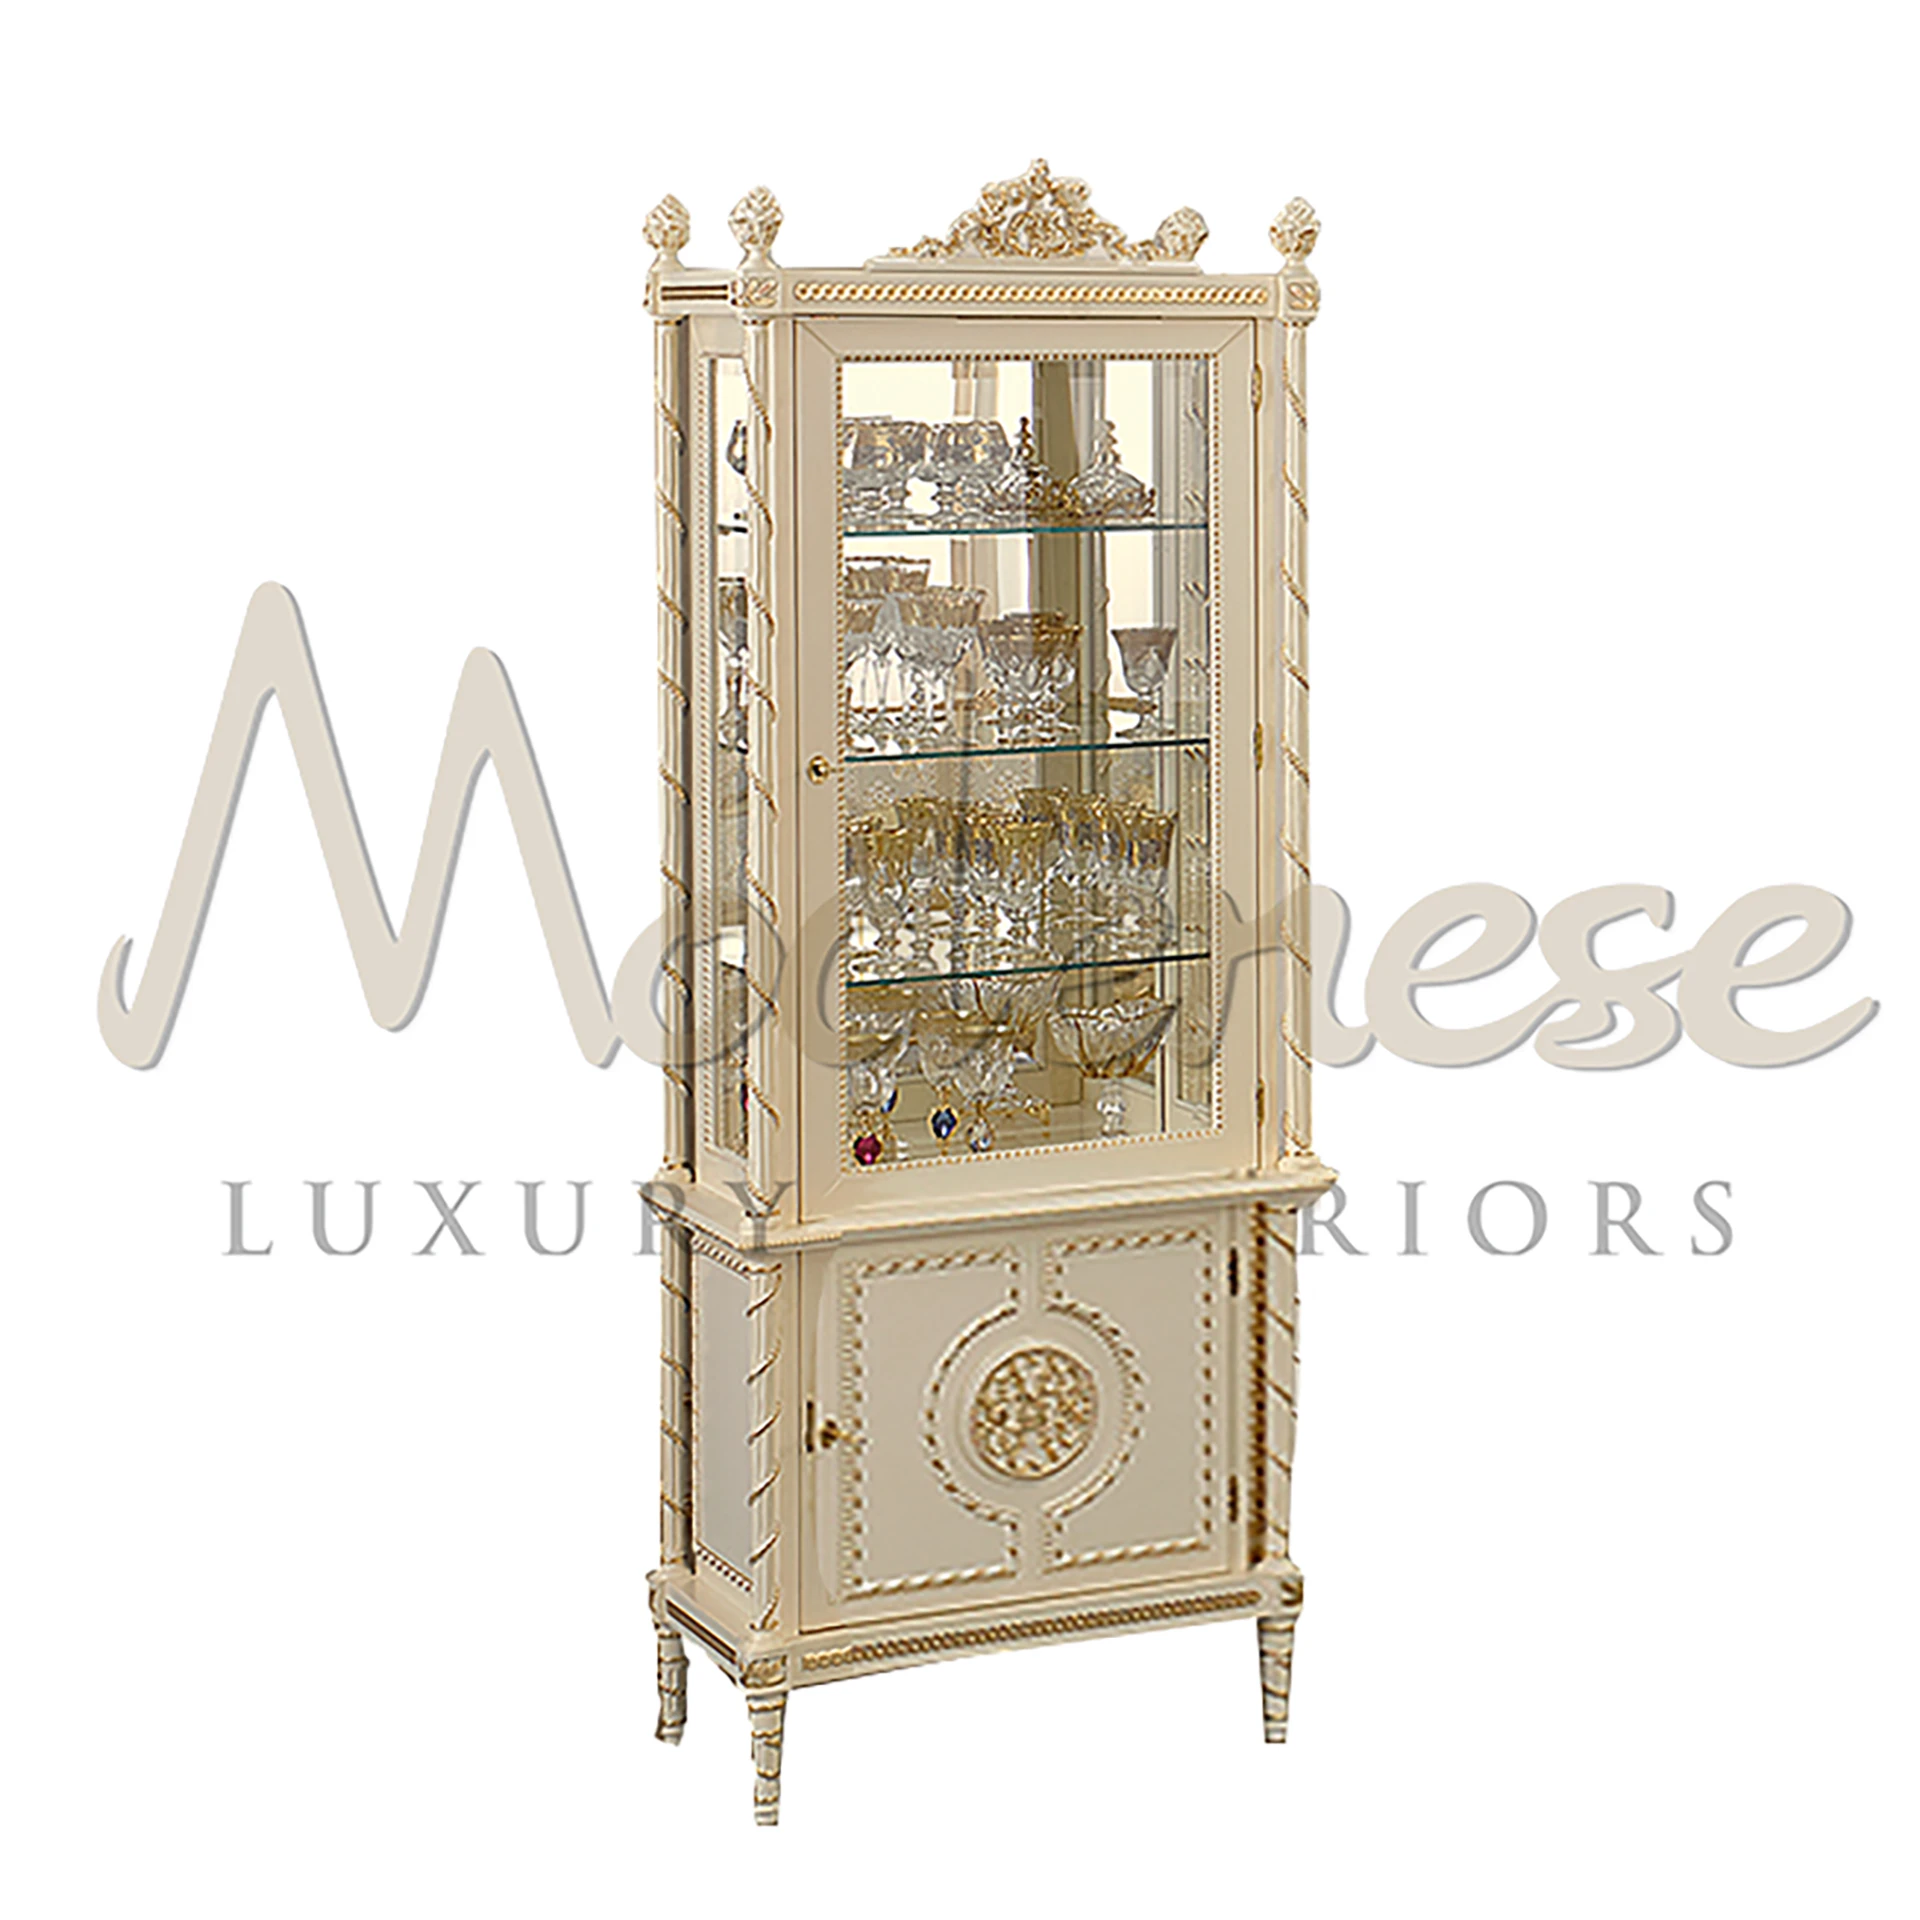 Classic white wooden 1- door cabinet with intricate gold detailing